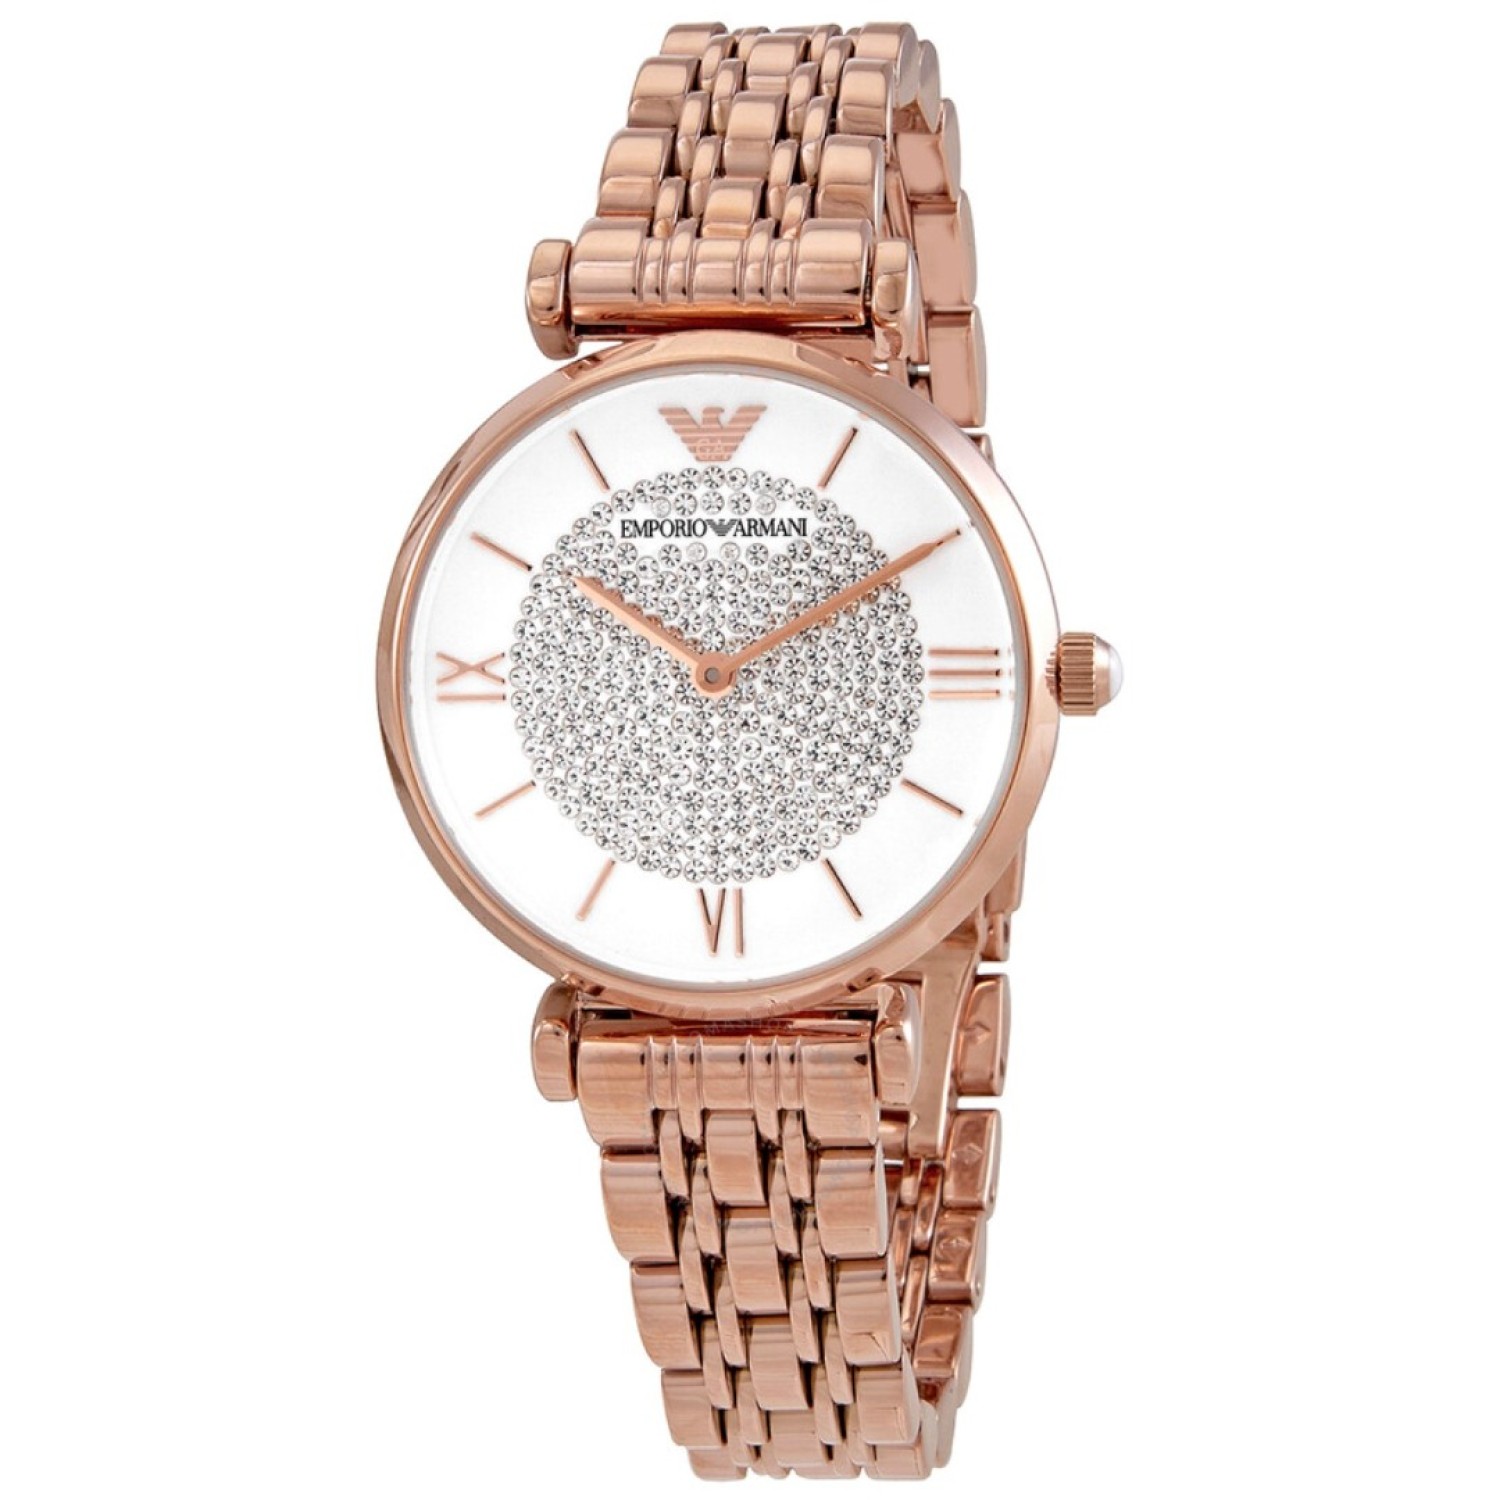 AR11244 Emporio Armani Womens Two-Hand Rose Gold Stainless Steel Watch. The Emporio Armani AR11244 Rose Gold Watch is a stylish and elegant timepiece designed to make a statement.